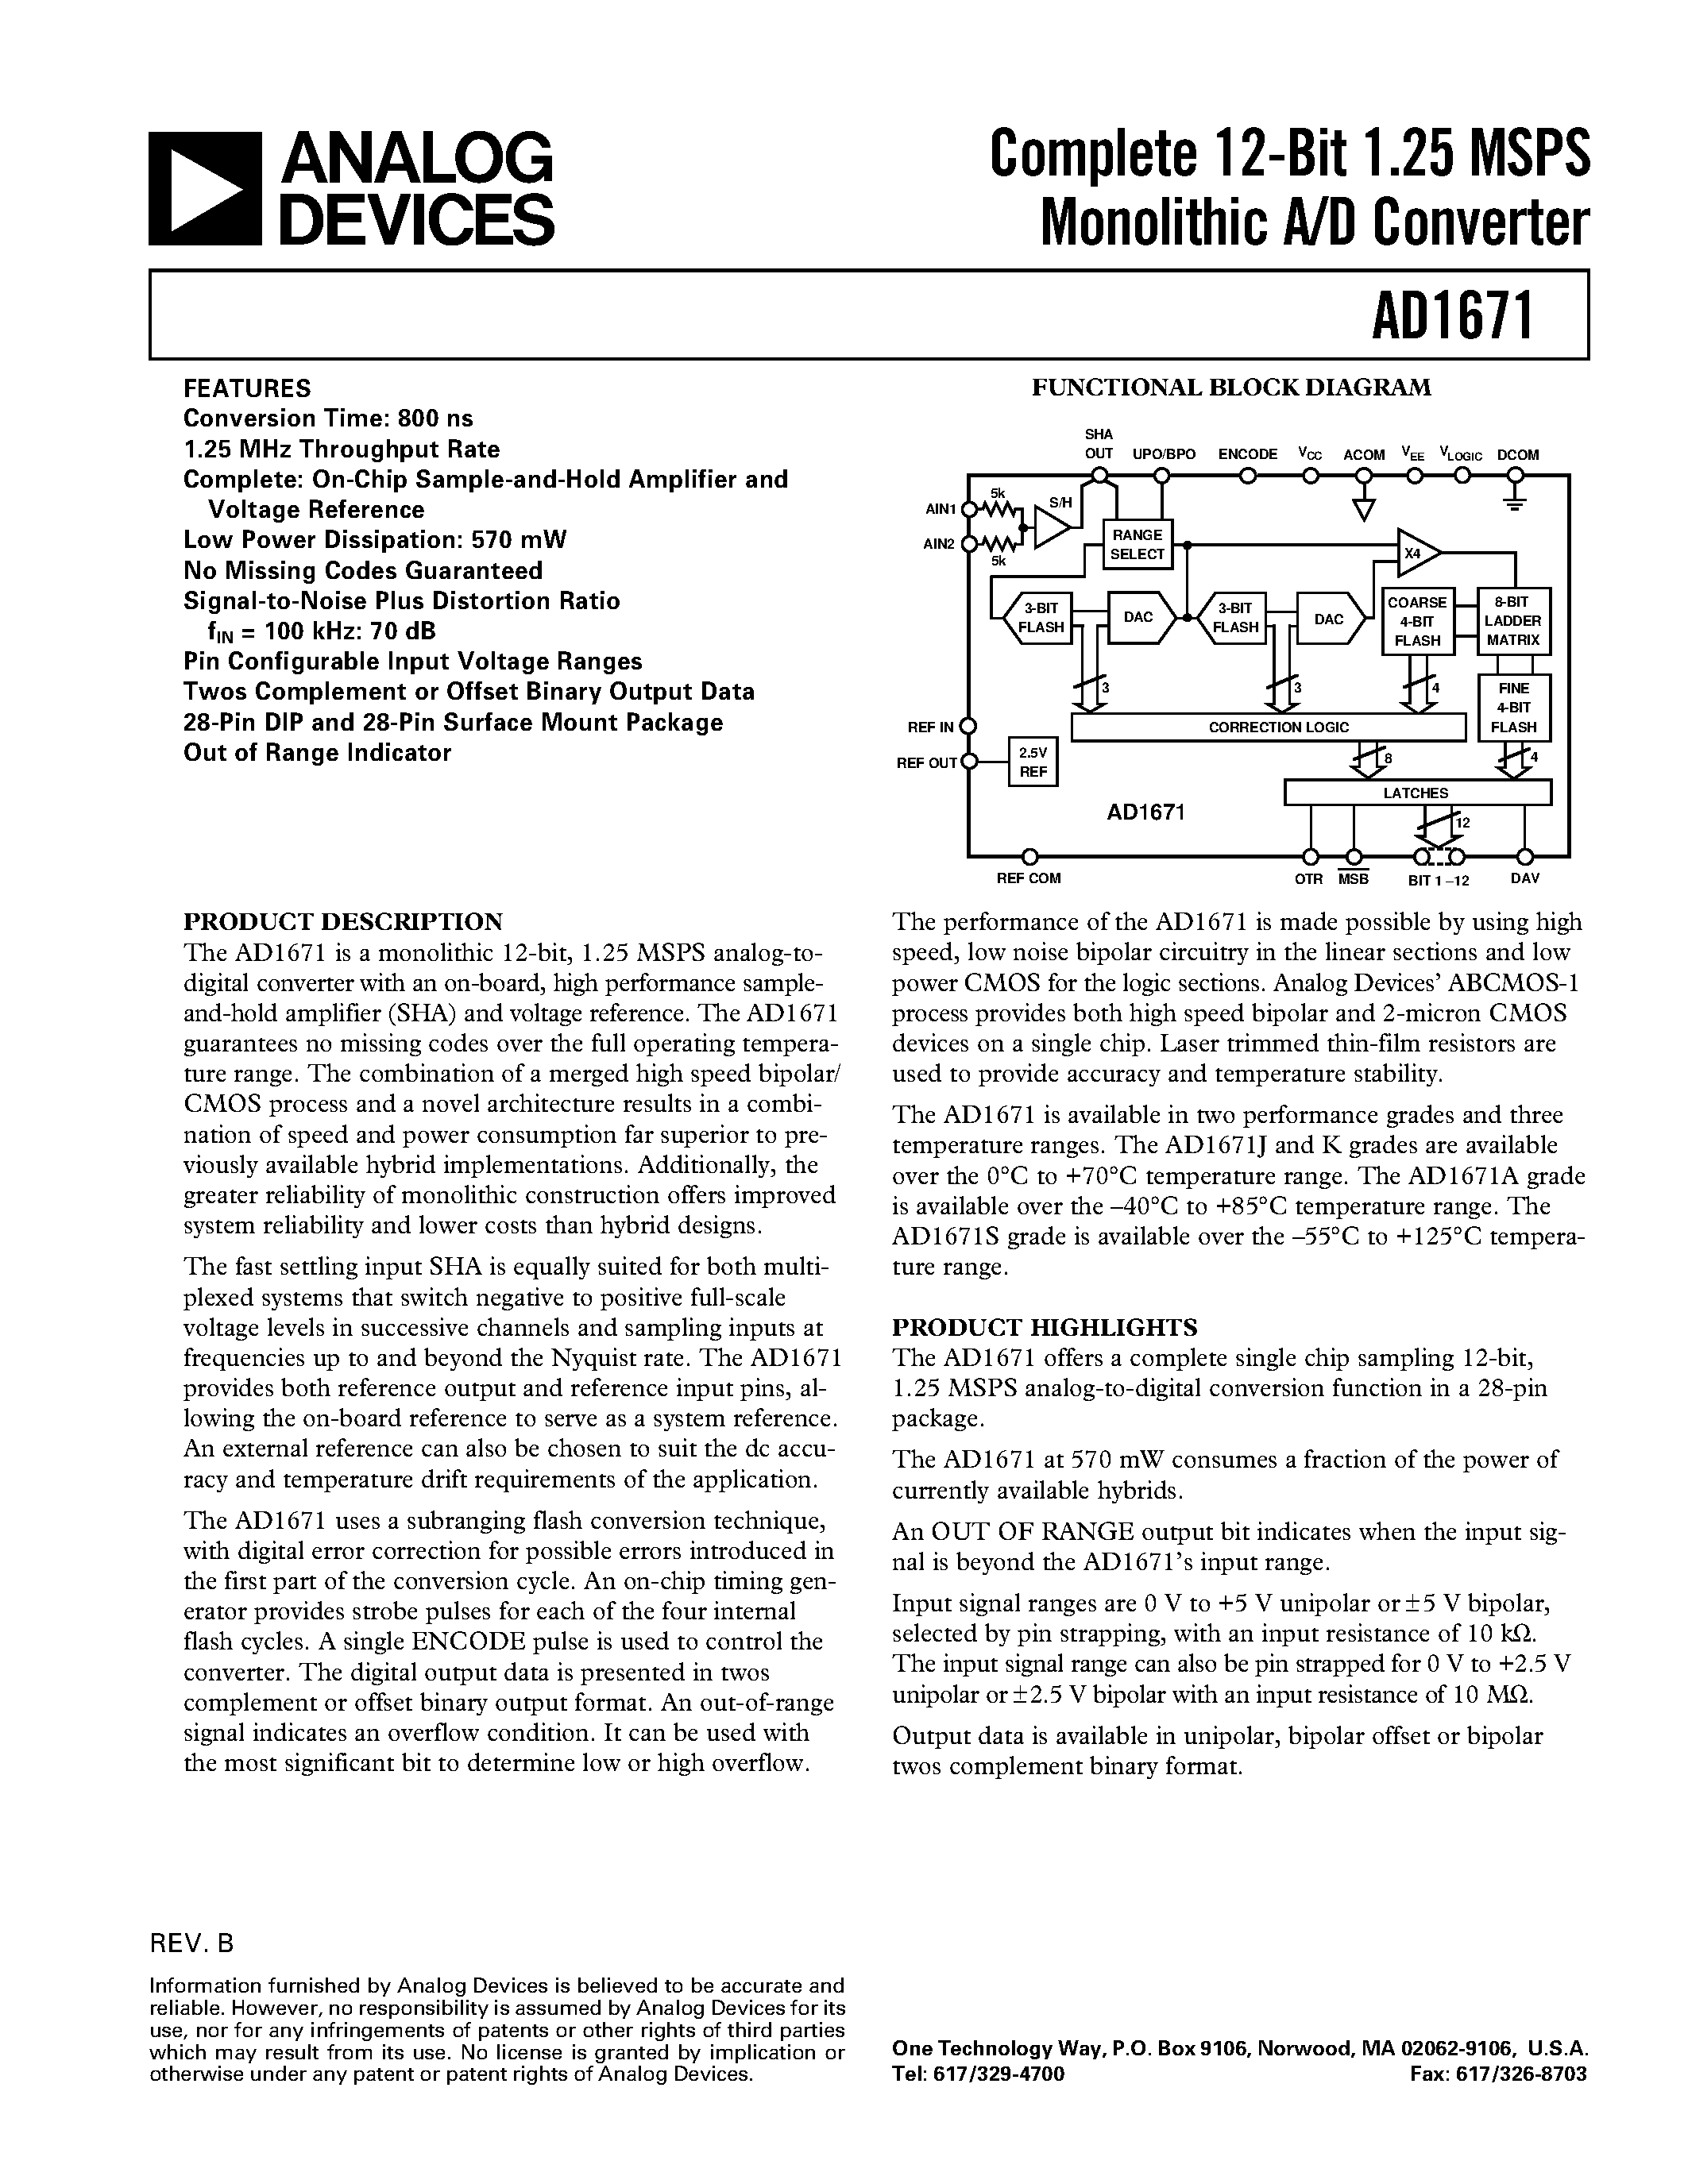 Datasheet AD1671A - Complete 12-Bit 1.25 MSPS Monolithic A/D Converter page 1